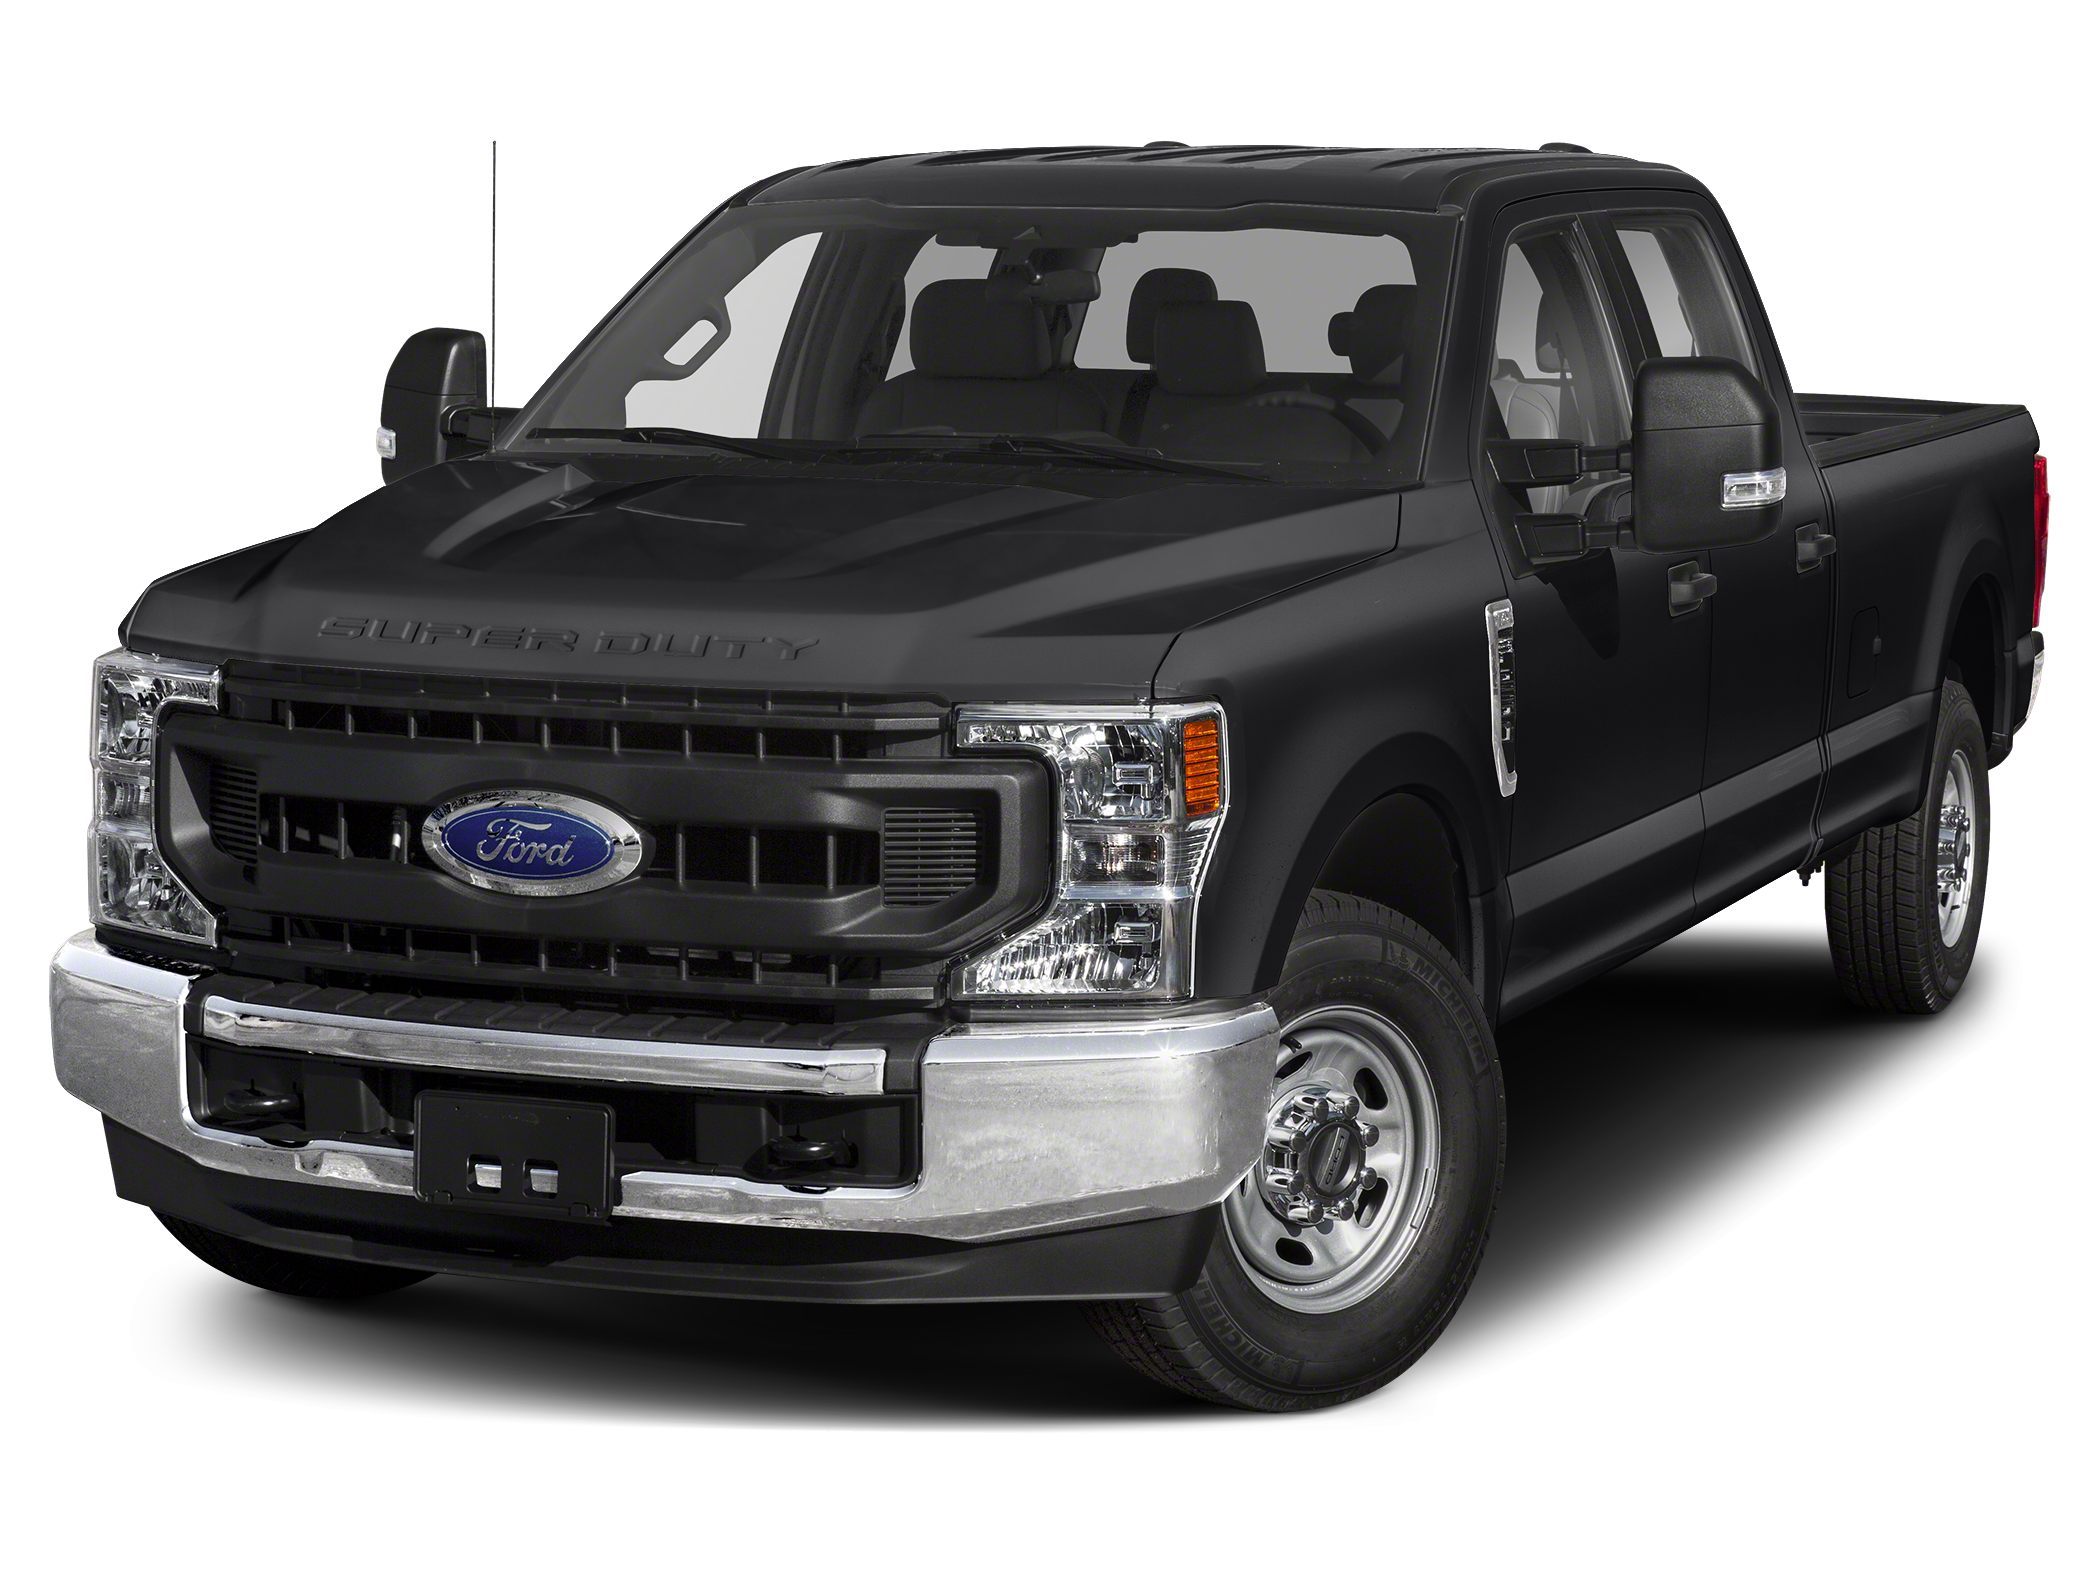 Used Ford Super Duty F 250 Srw Epping Nh